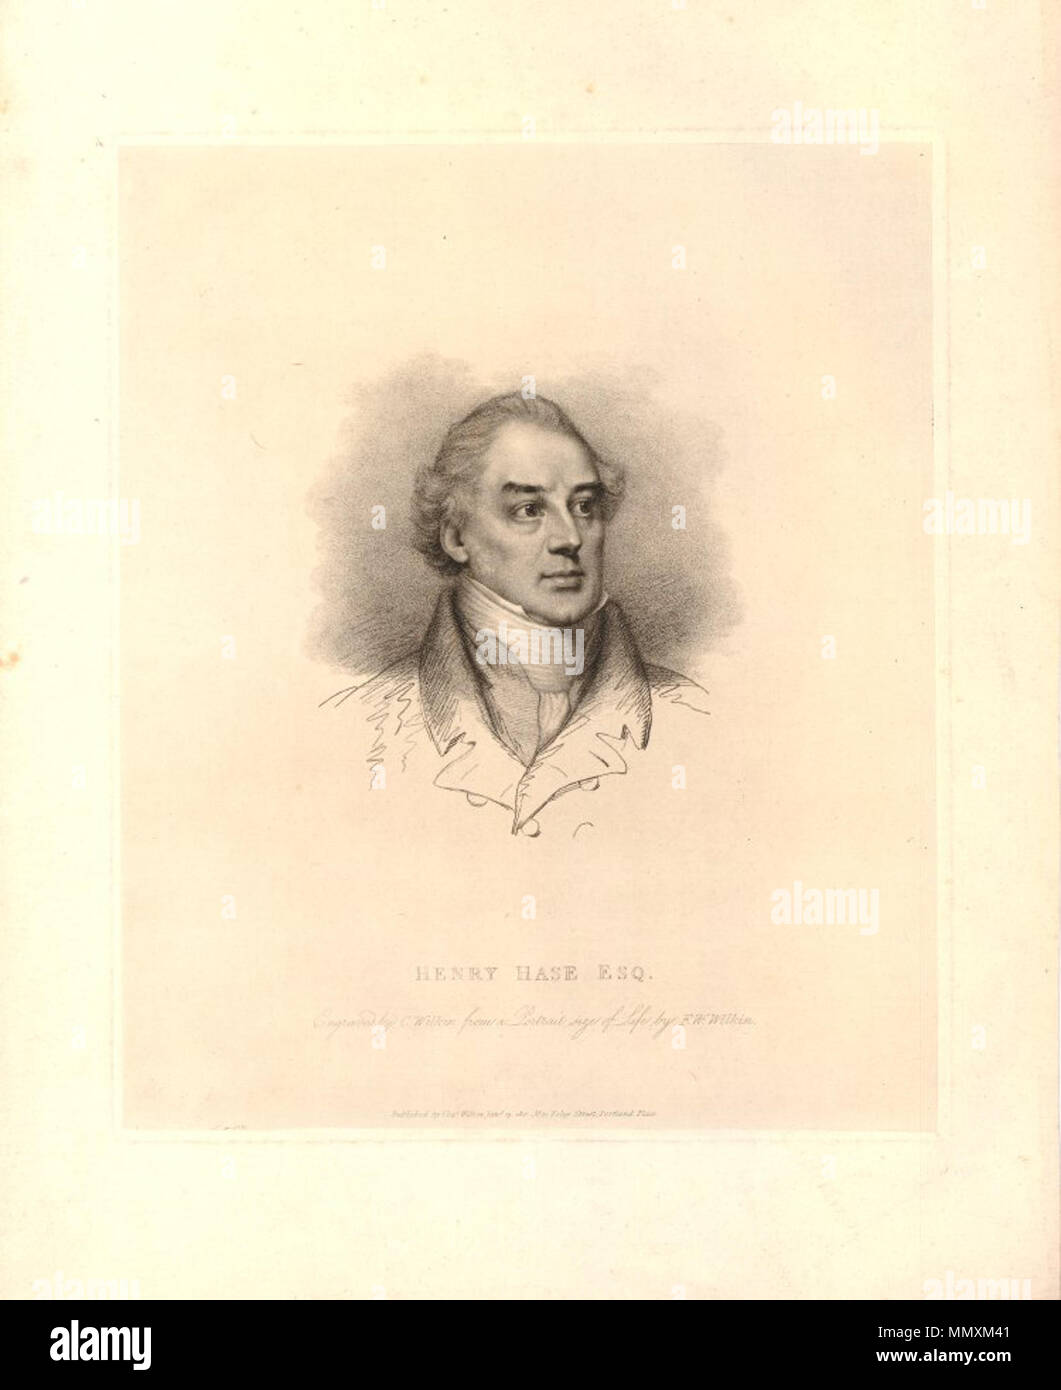 . Henry Hase(1763-1829), Chief cashier of the Bank of England, stipple, soft-ground etching, Print made by Charles Wilkin, Published by Charles Wilkin after Francis William Wilkin Published in London 1821, 'Engraved by C. Wilkin from a Portrait size of Life by F.W. Wilkin. / Published by Chas. Wilkin Jany. 19, 1821 No. 31 Foley Street, Portland Place.'.  . 1821.   Charles Wilkin  (circa 1750–1814)    Description English engraver and painter father of Francis William Wilkin  Date of birth/death 1750 28 May 1814  Location of birth/death London London  Work location London  Authority control  : Q Stock Photo